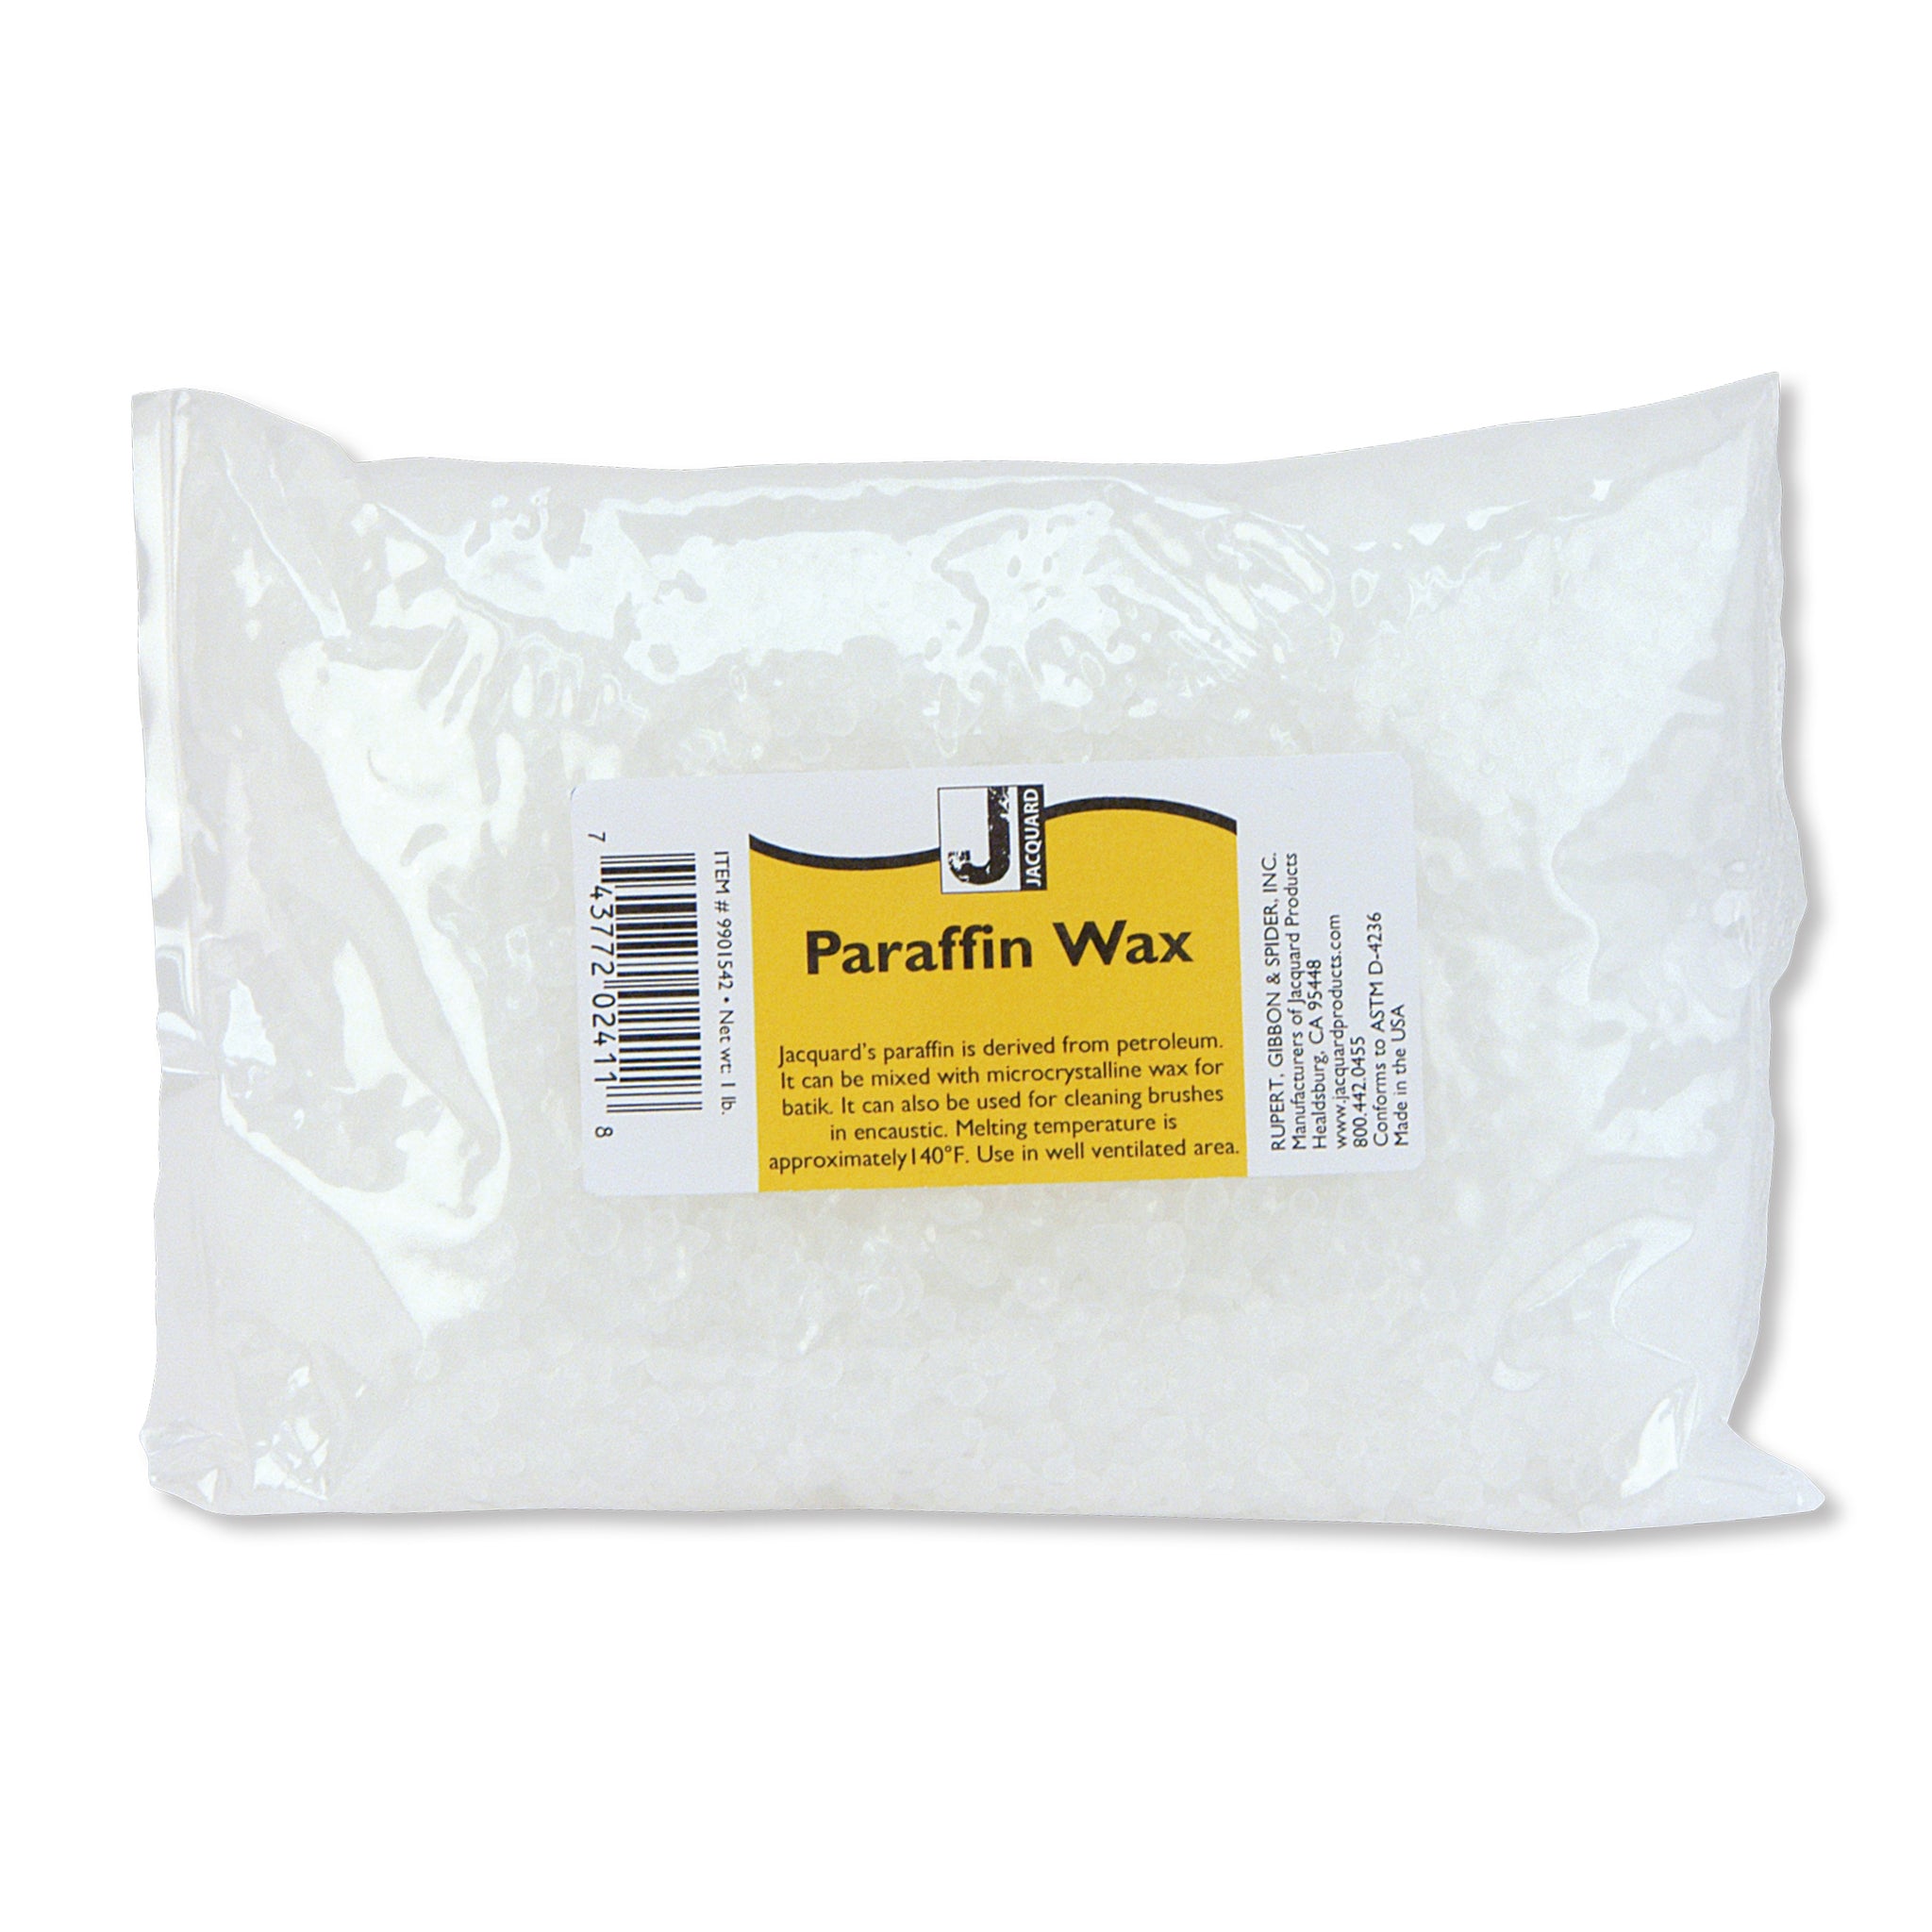 Products - industrial paraffin wax Supply, FDA paraffin wax, micro-crystalline  wax, Paraffin Candle Wax